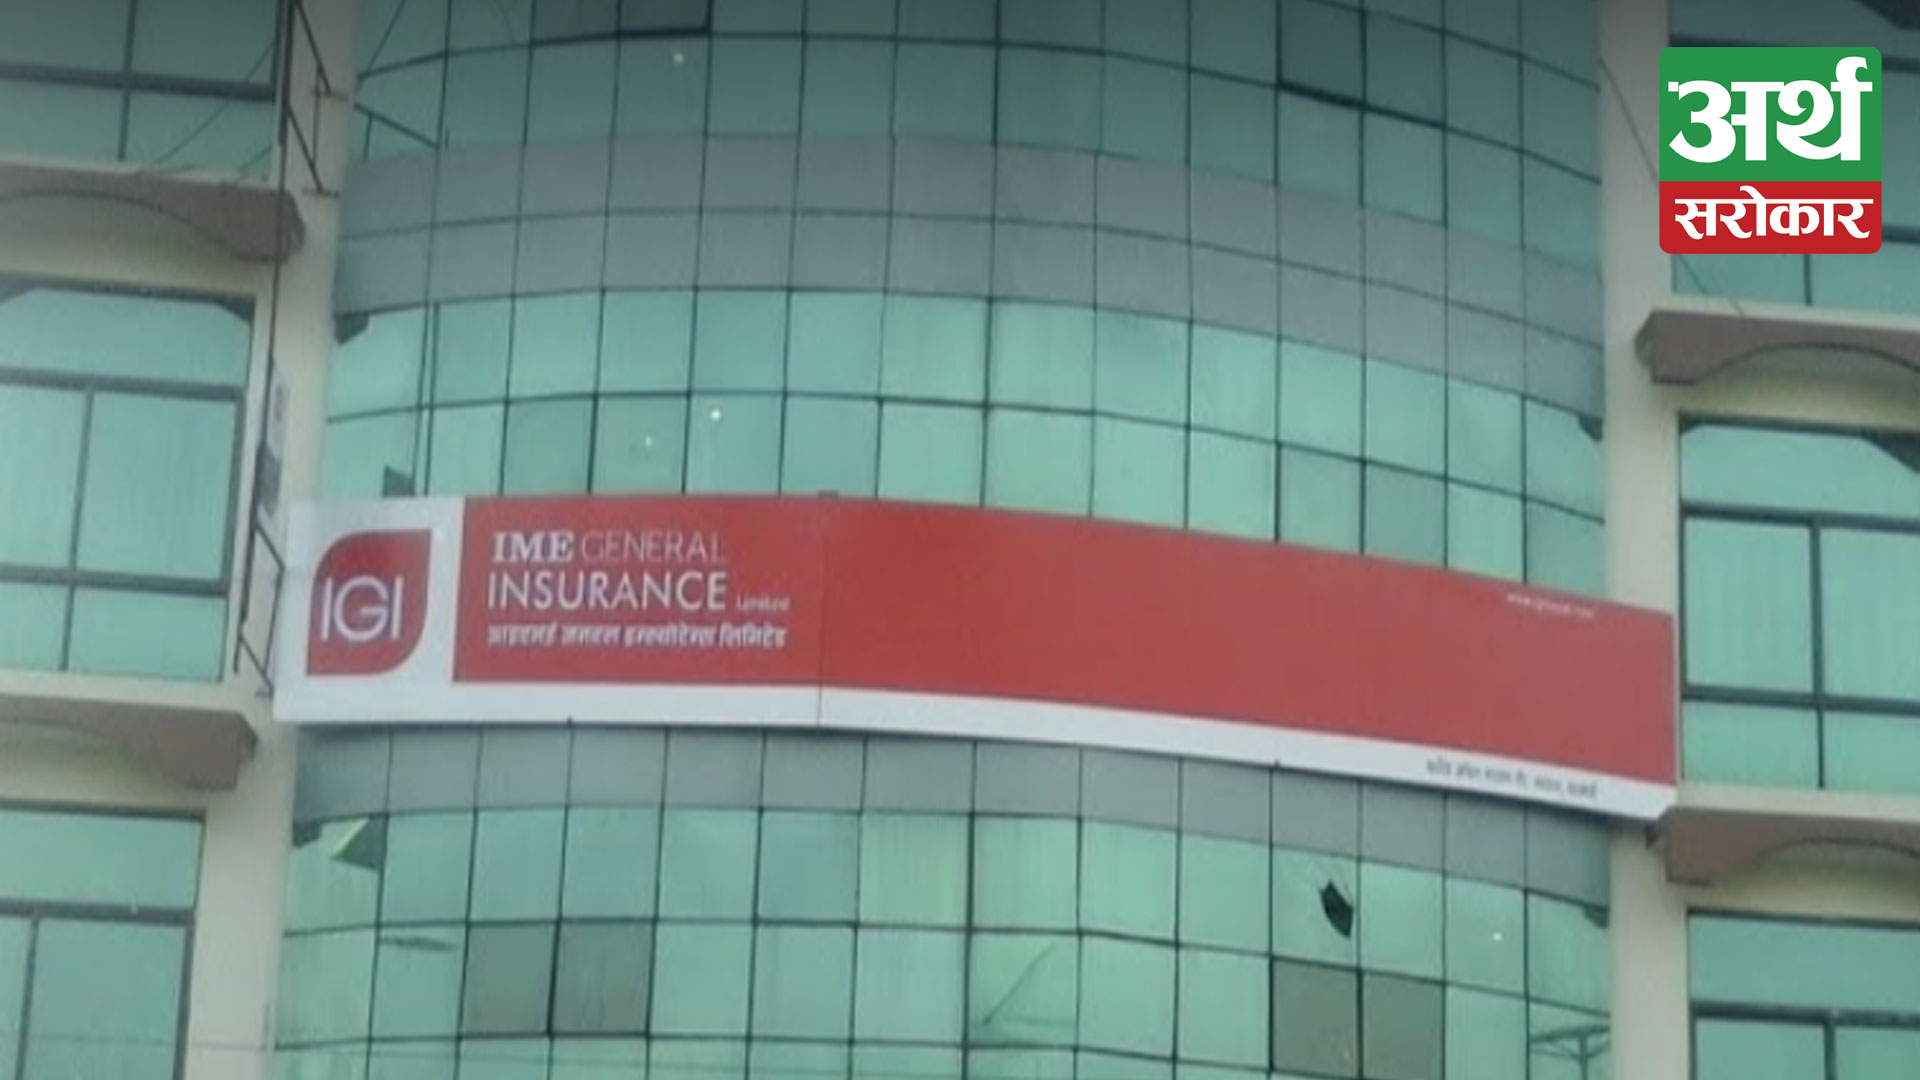 IME General’s net profit increased by 125.67%